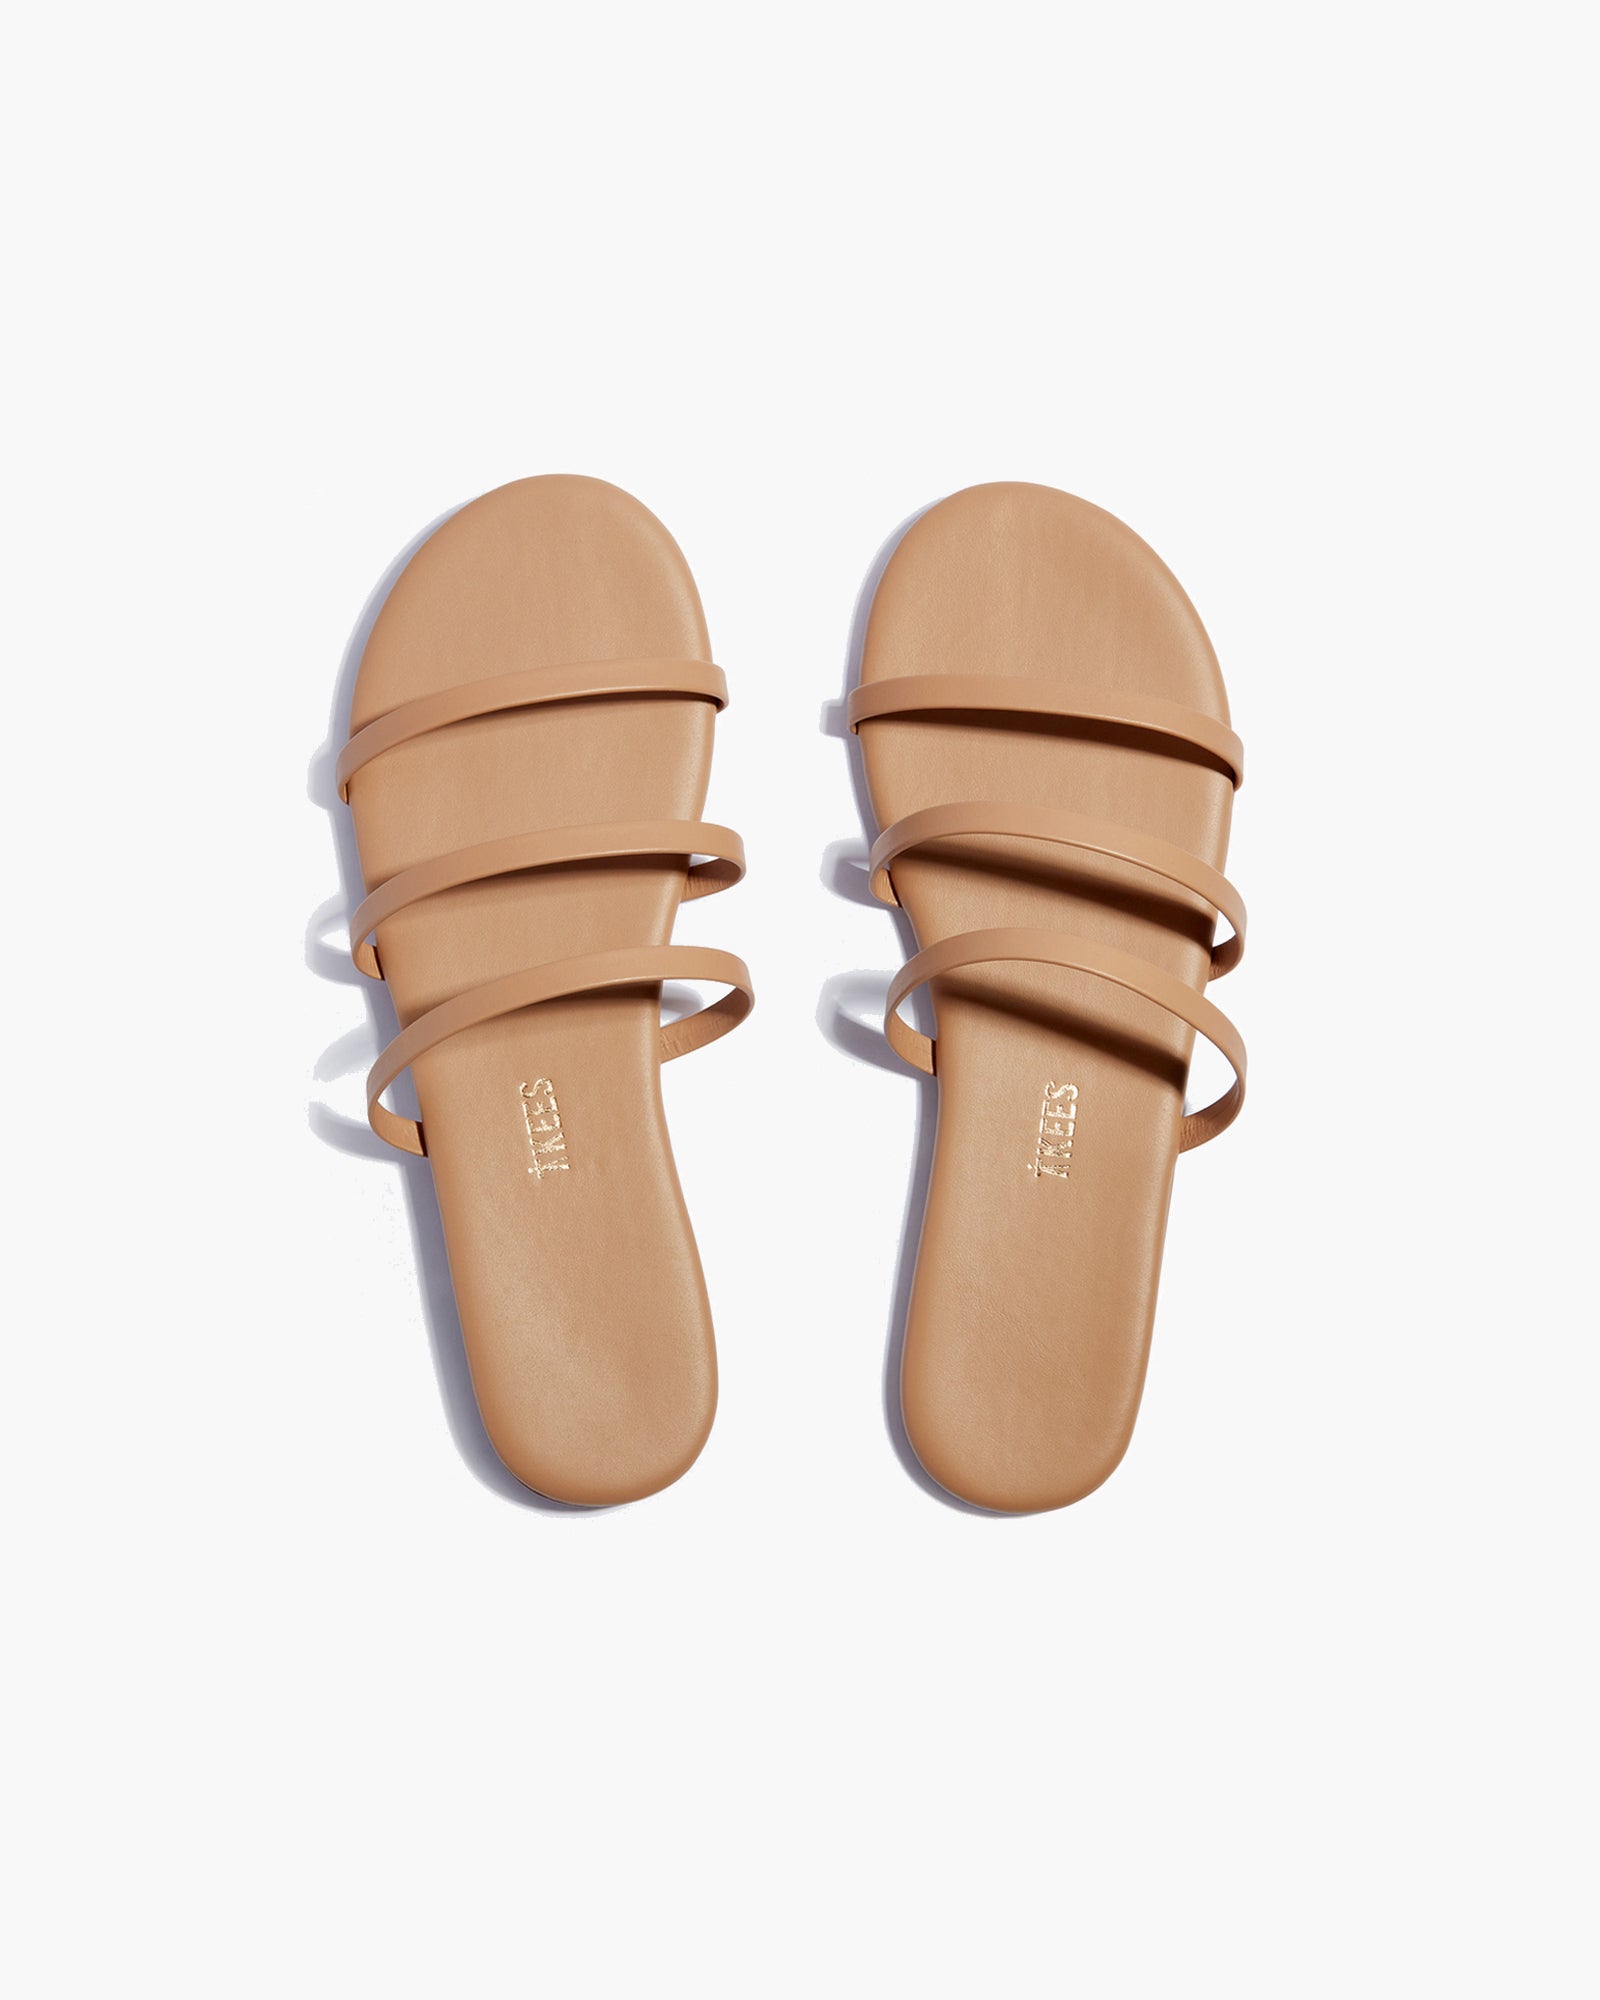 Rose Gold Women's TKEES Emma Sandals | LWCXYU281